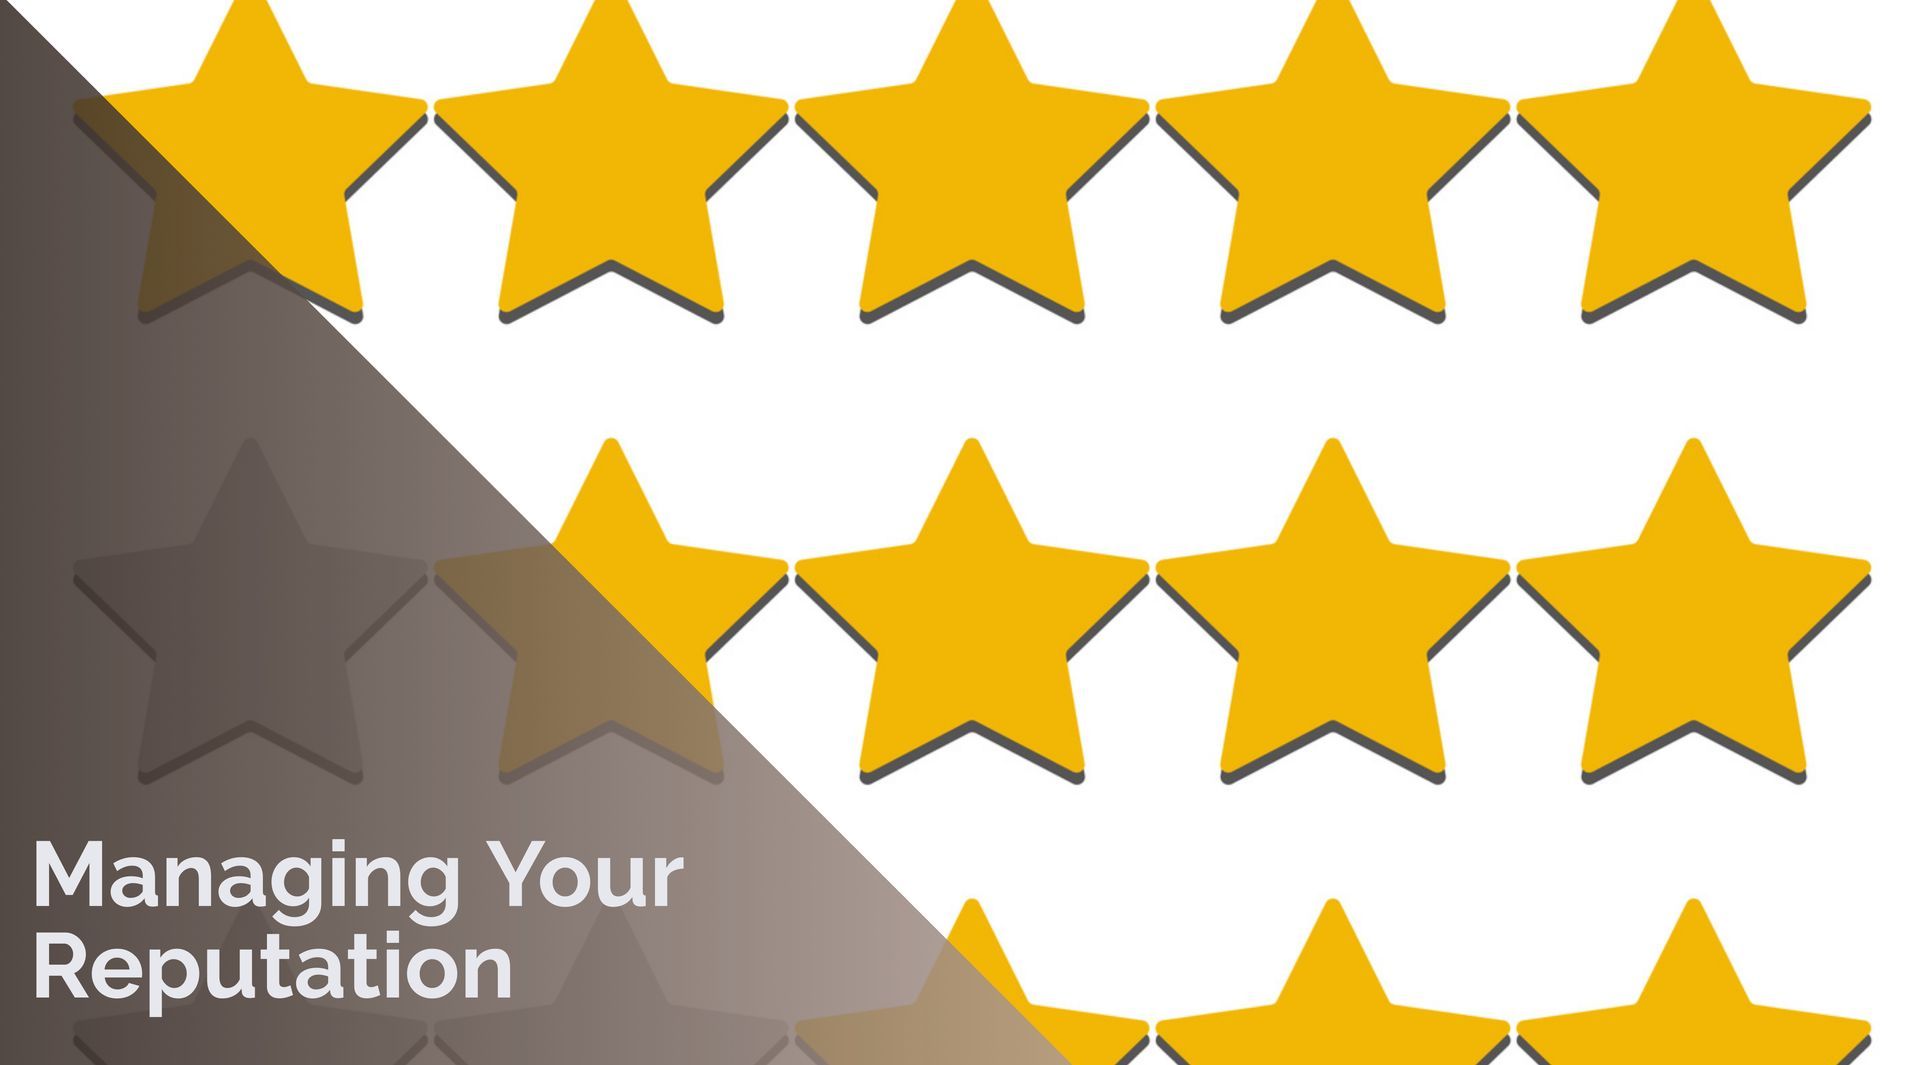 Star rating a guide to managing reputation